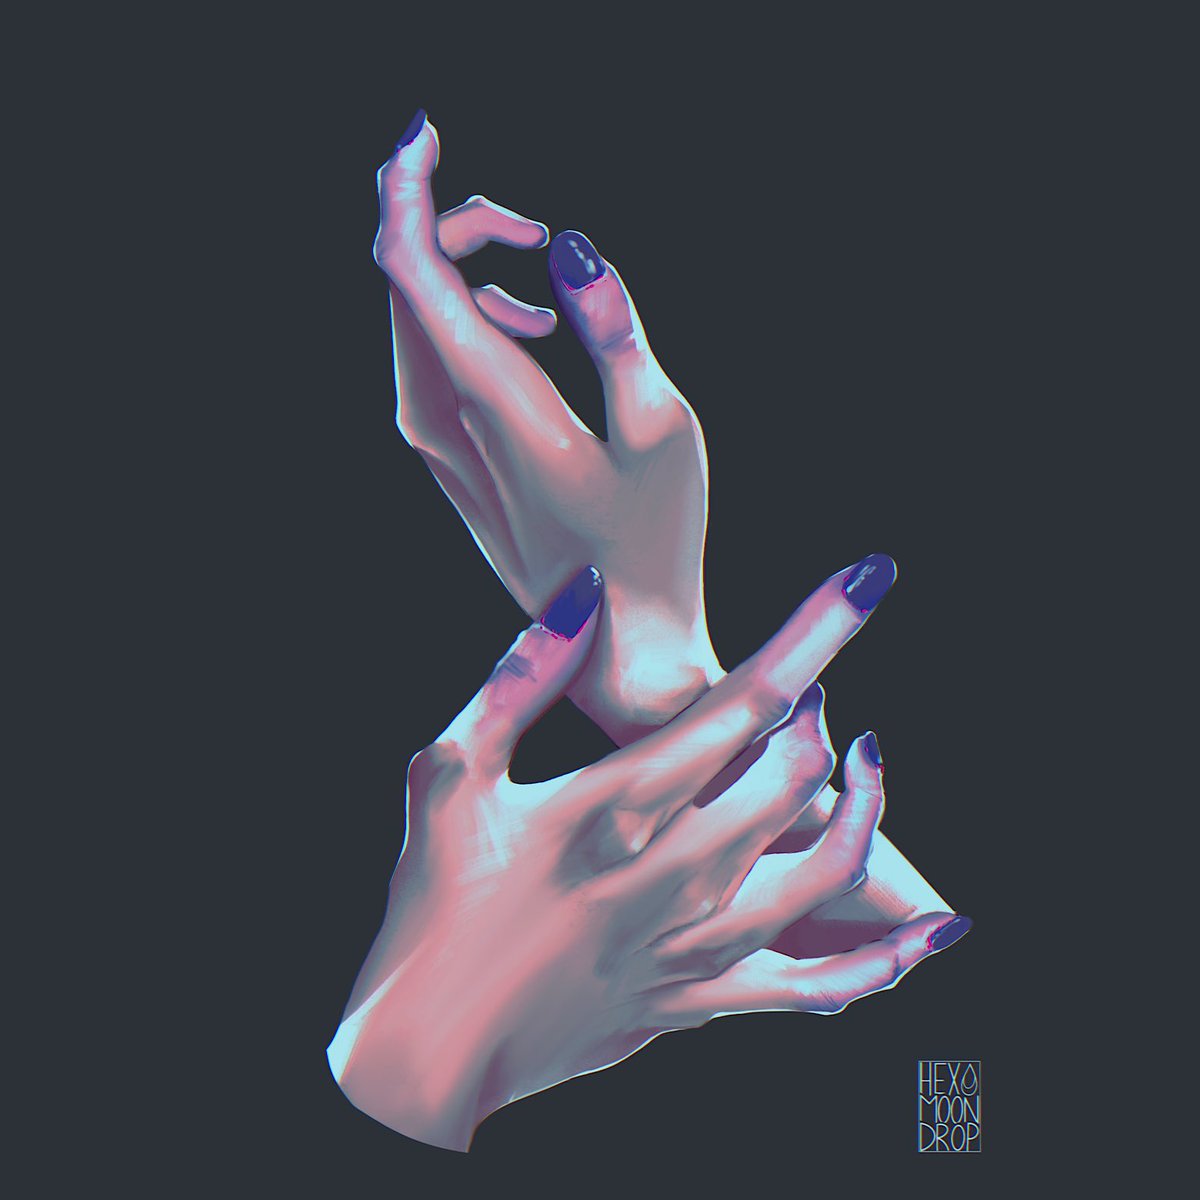 Cold Hands 🤲🏼✨ Painted in 2022, still pretty proud of this ☺️ Need to go back and do some more studies 🙌🏼✨